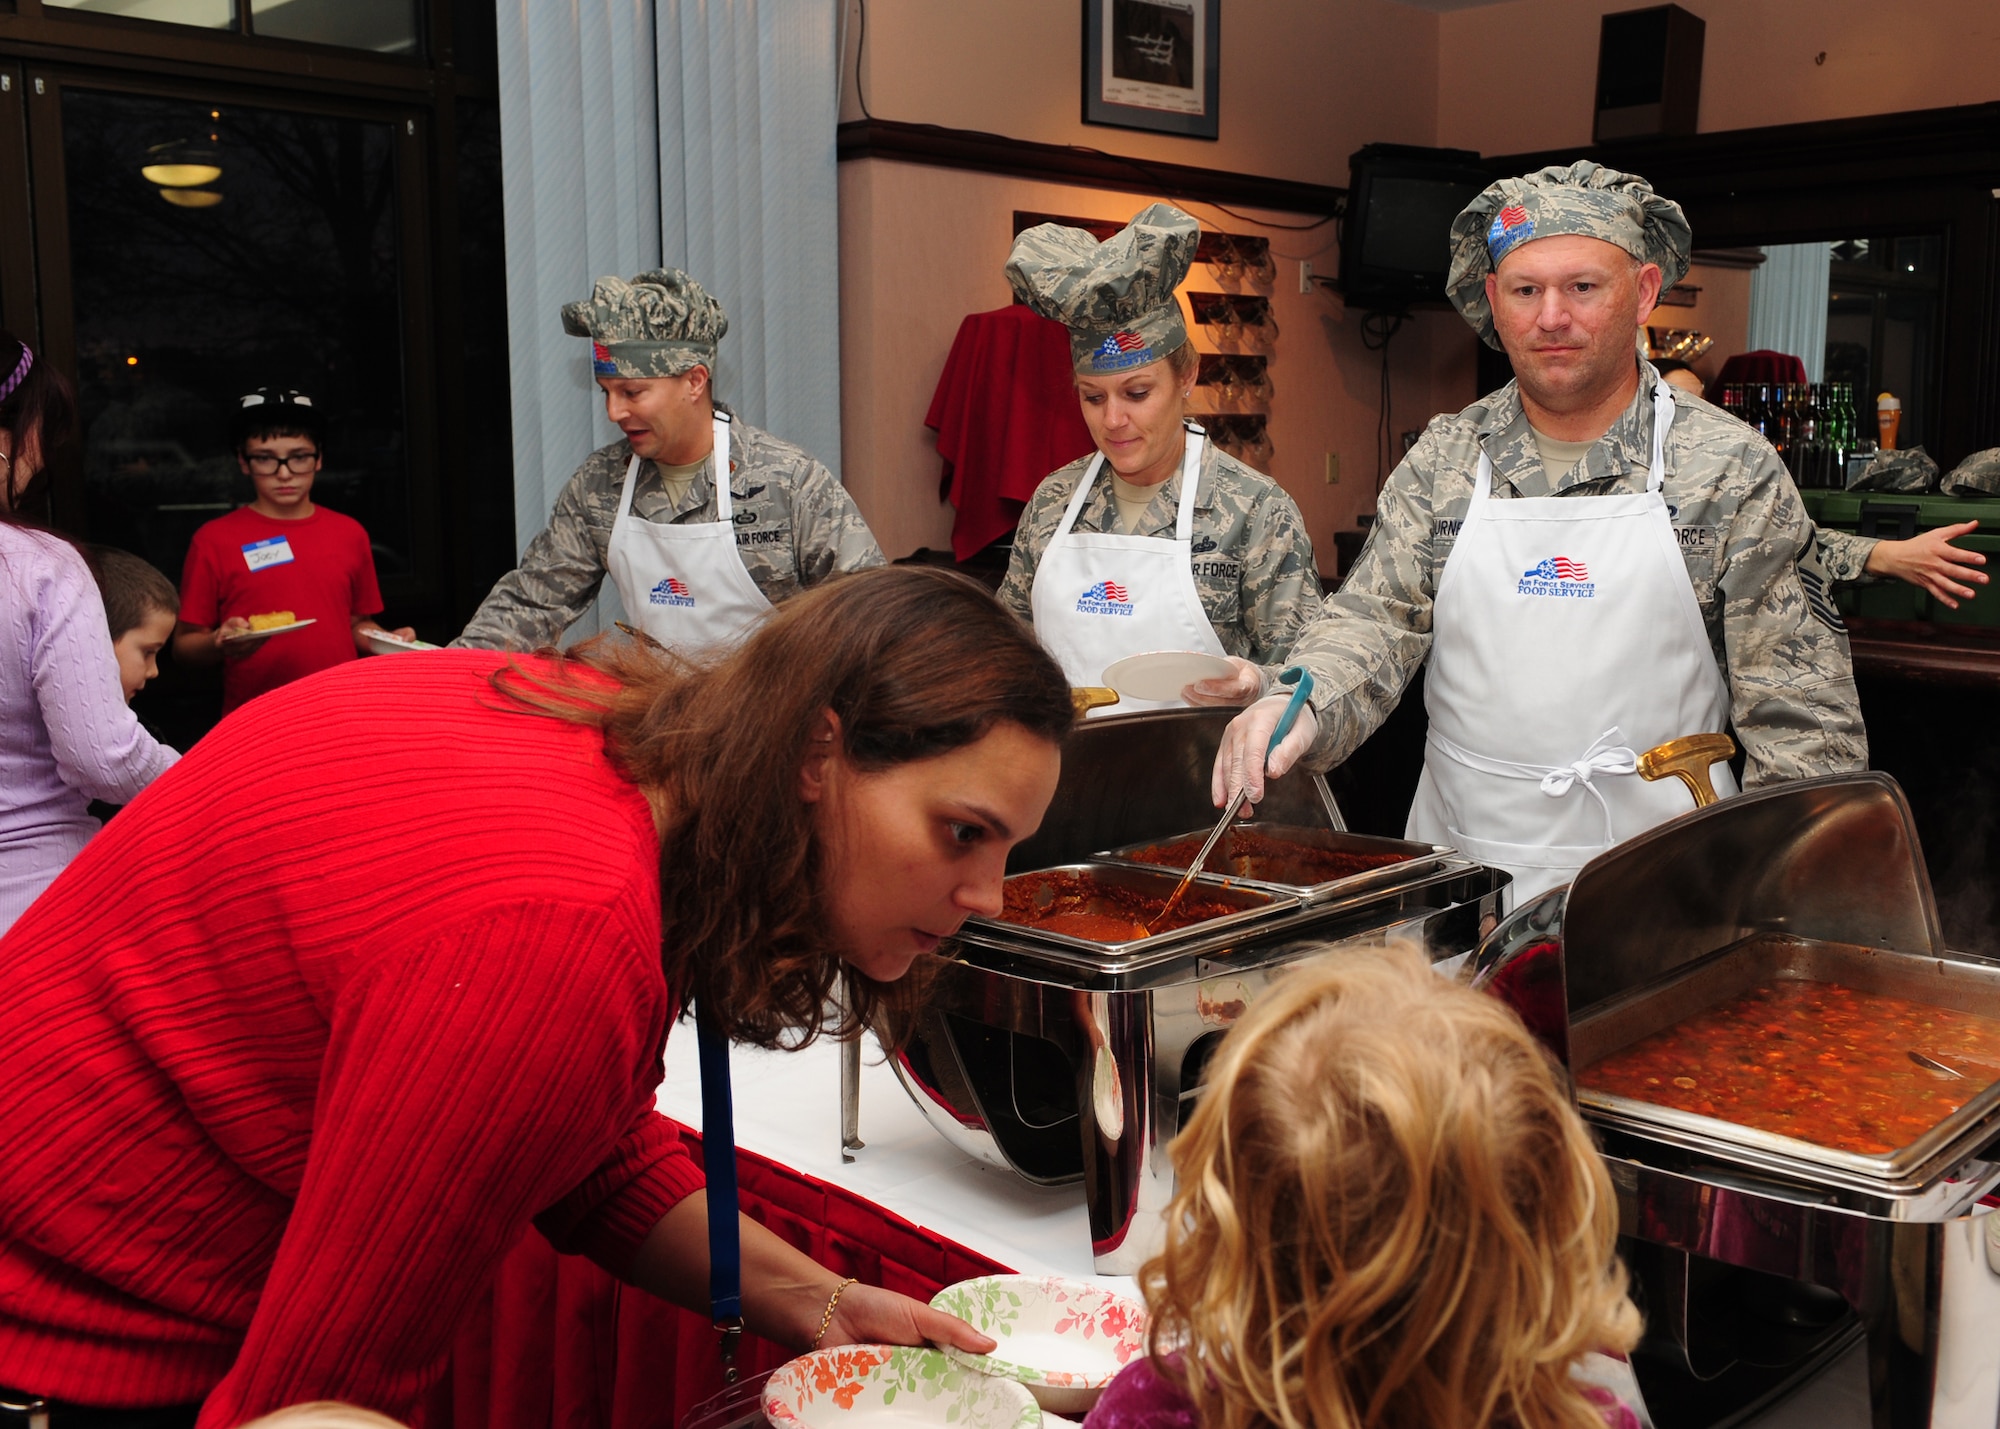 First sergeants serve chili and soup at the Hearts Apart Dinner Dec. 7, 2012, at Beale Air Force Base, Calif. Leadership from several squadrons attended to answer questions while Beale’s first sergeants served during the event for families of deployed Airmen. (U.S. Air Force photo by Senior Airman Shawn Nickel/Released)